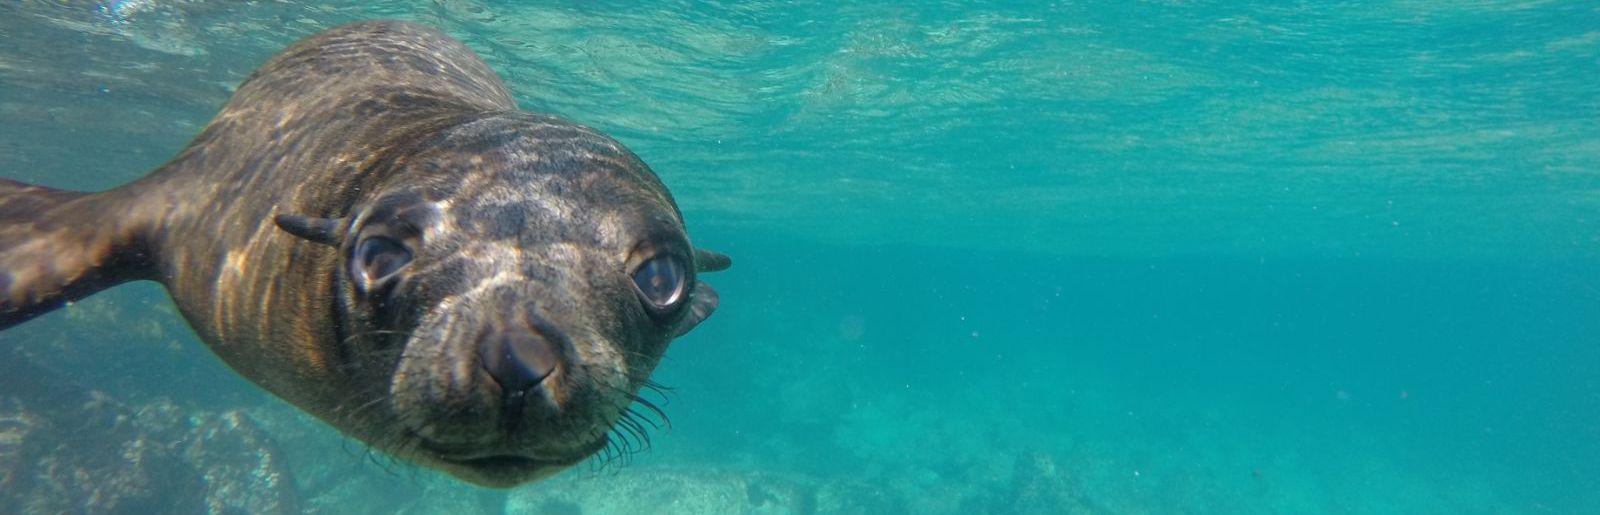 Narooma snorkel with Seals tour